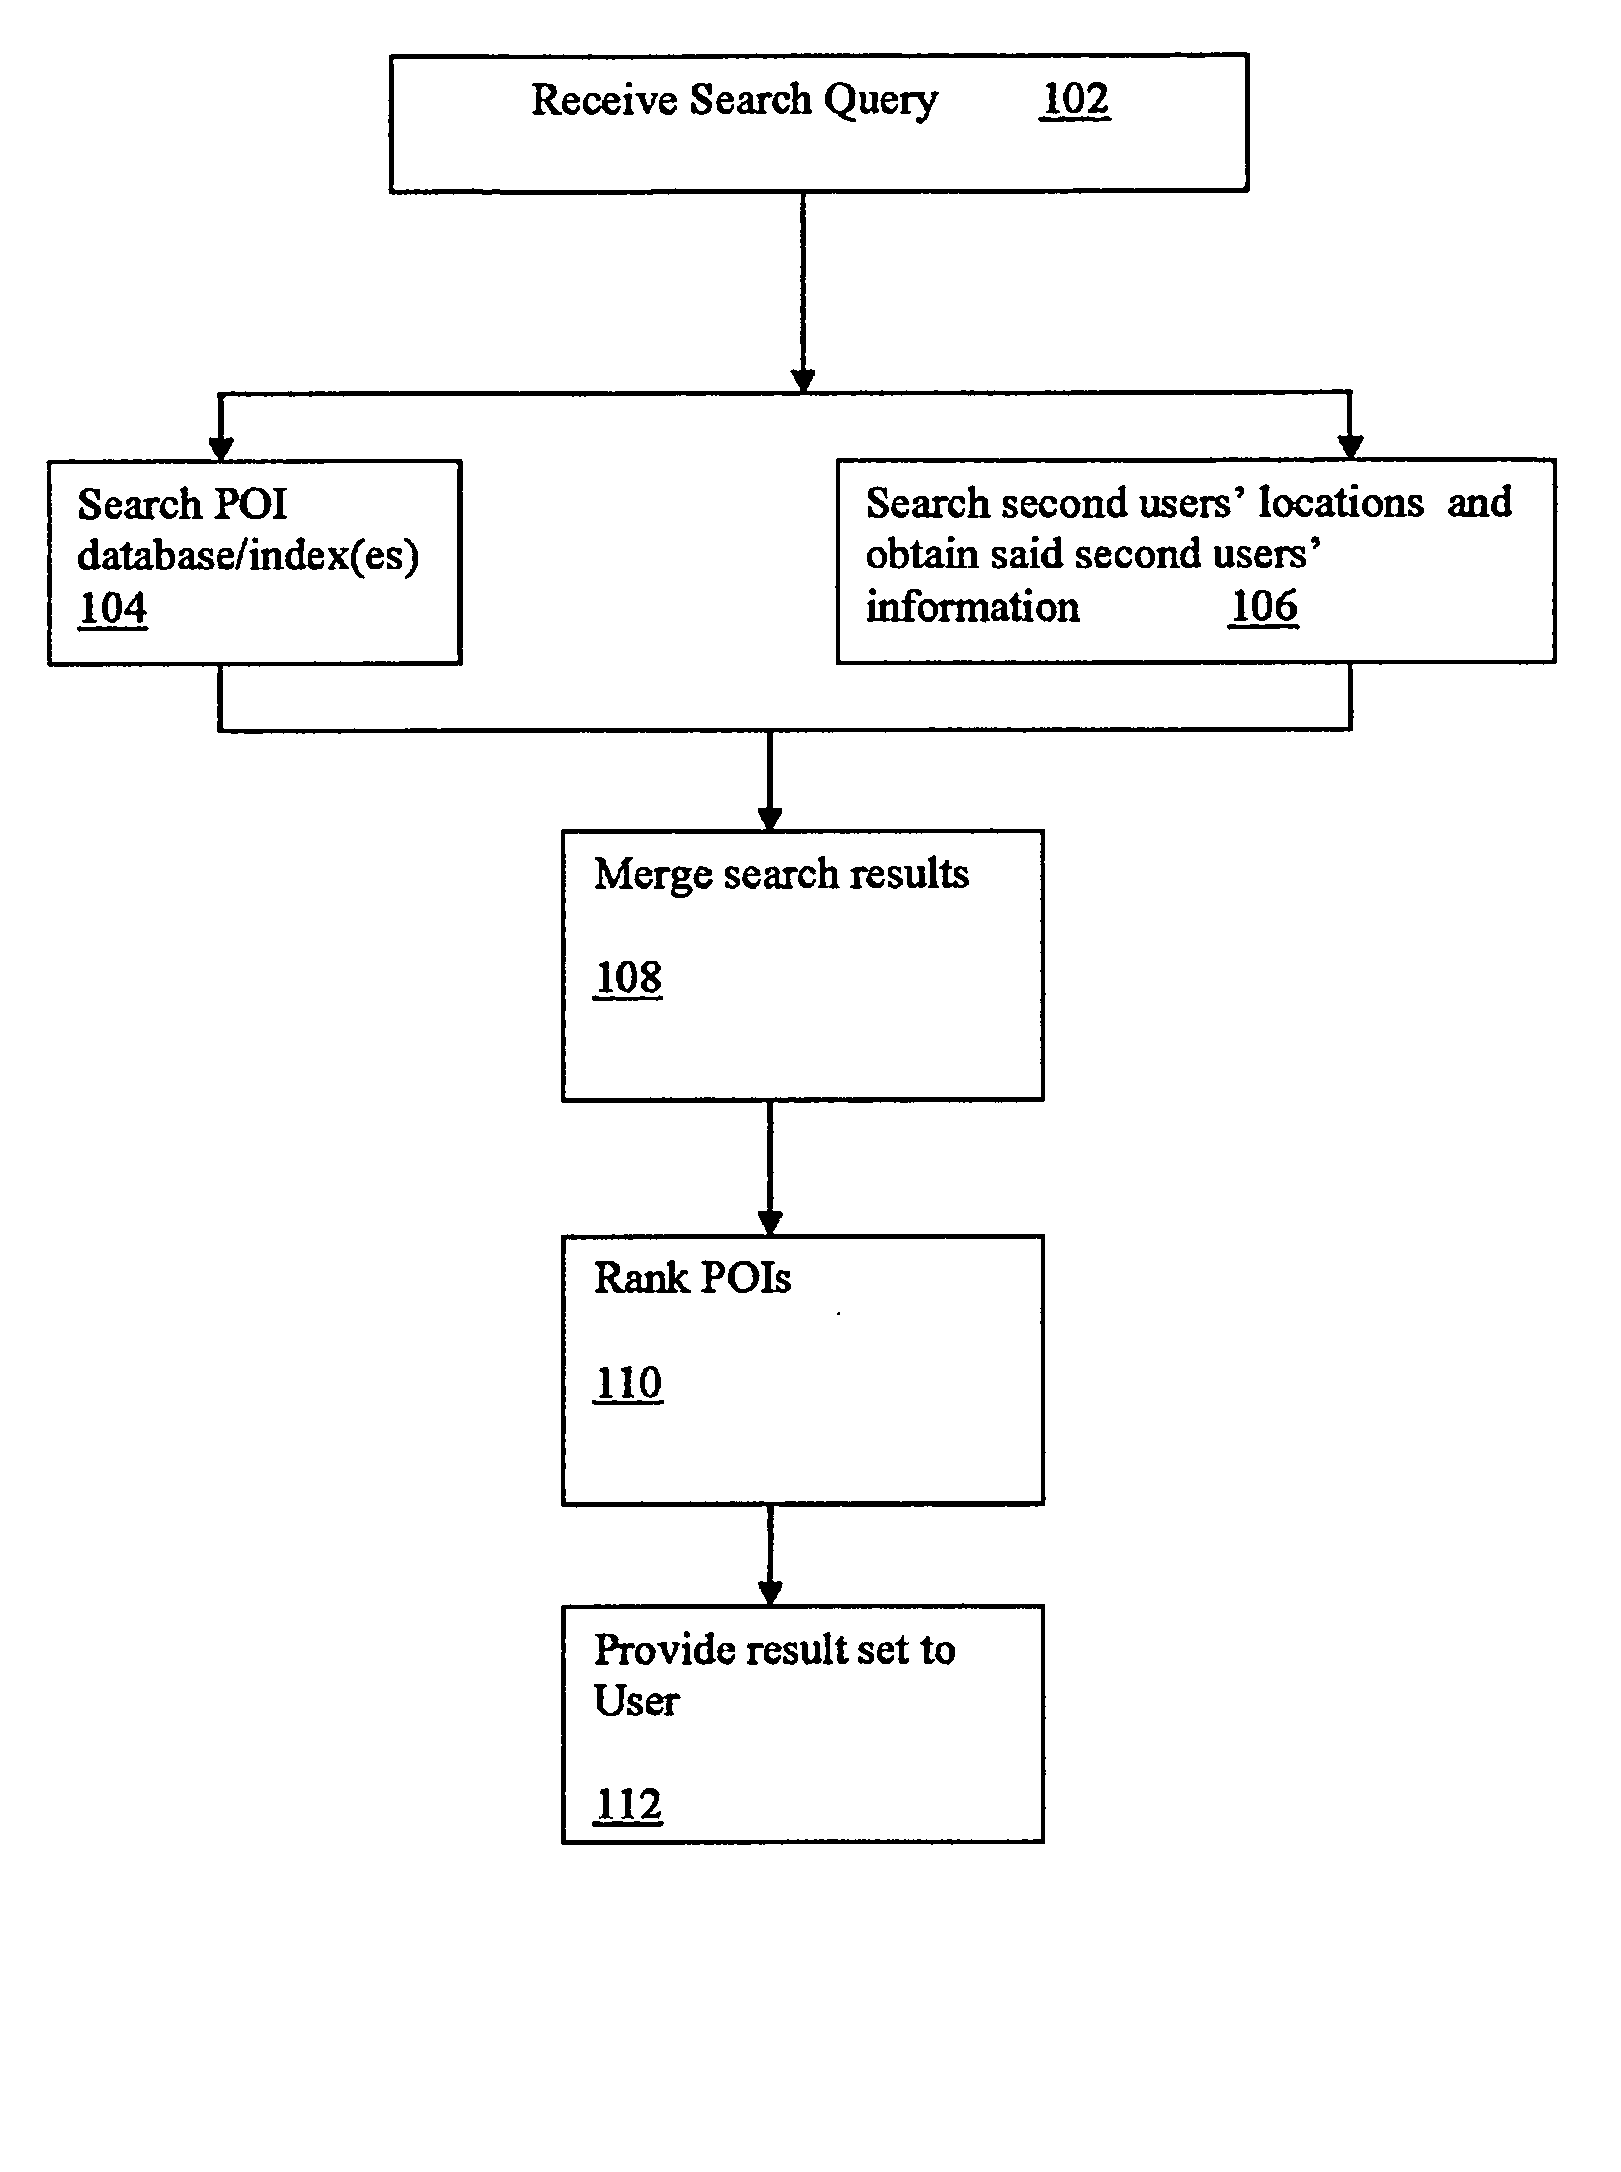 Method and system for generating and presenting search results that are based on location-based information from social networks, media, the internet, and/or actual on-site location